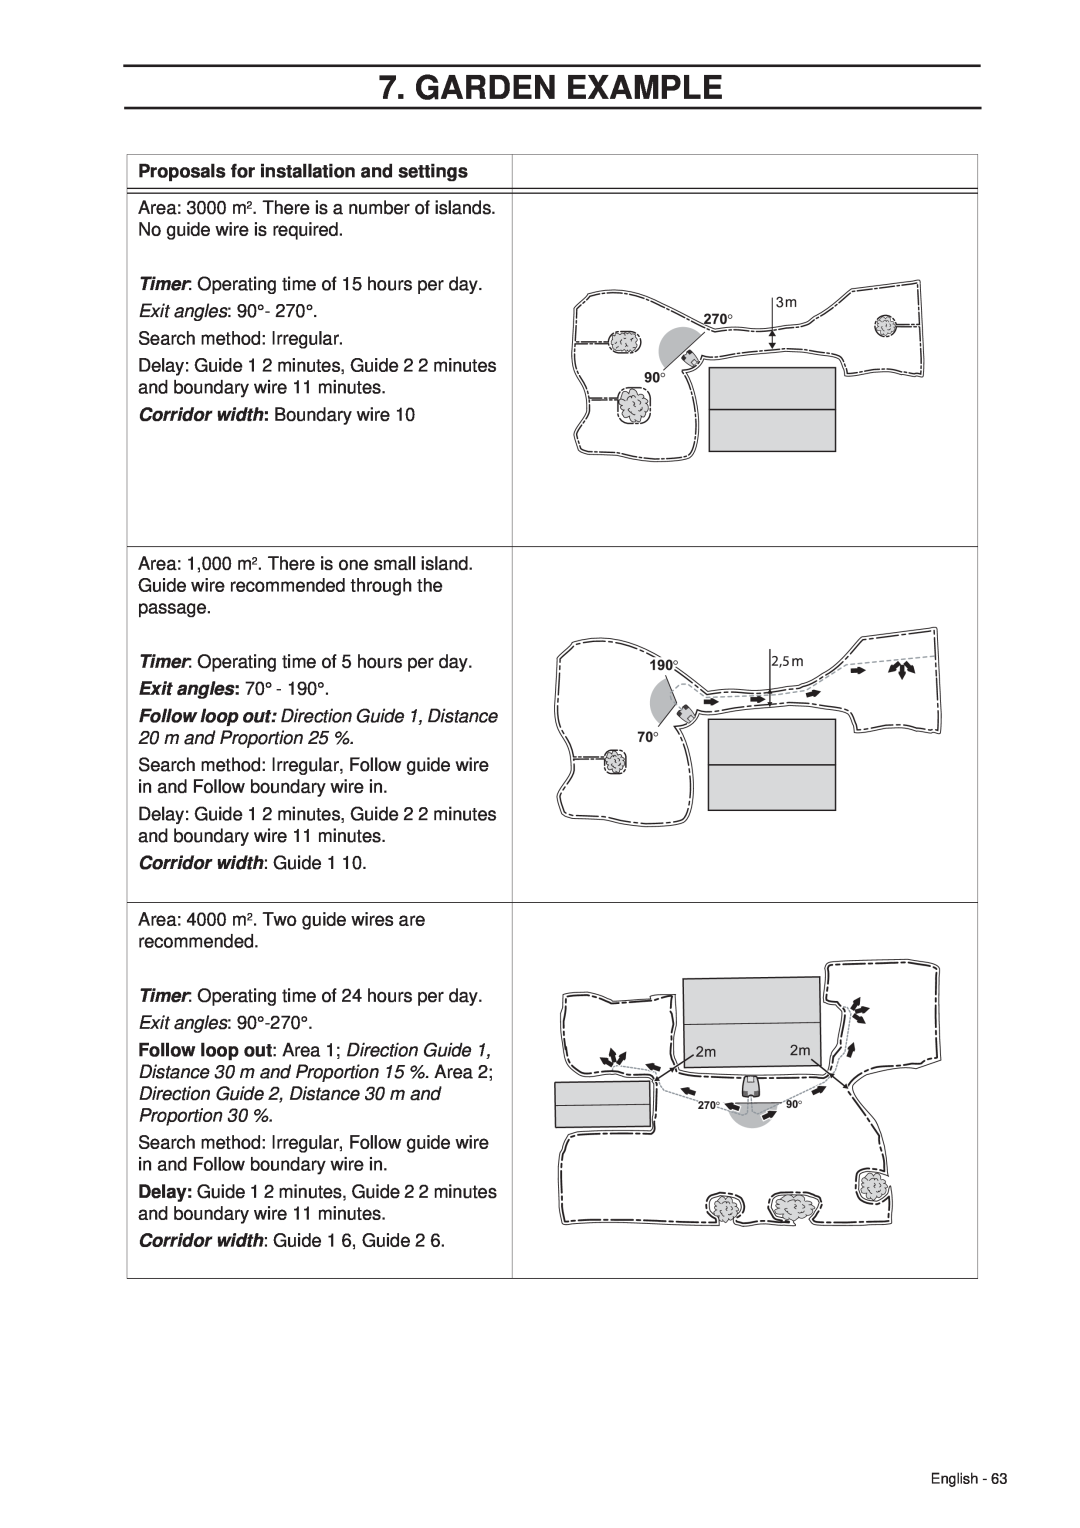 Husqvarna 260 ACX manual Exit angles, Garden Example, Proposals for installation and settings, Corridor width: Guide 1 